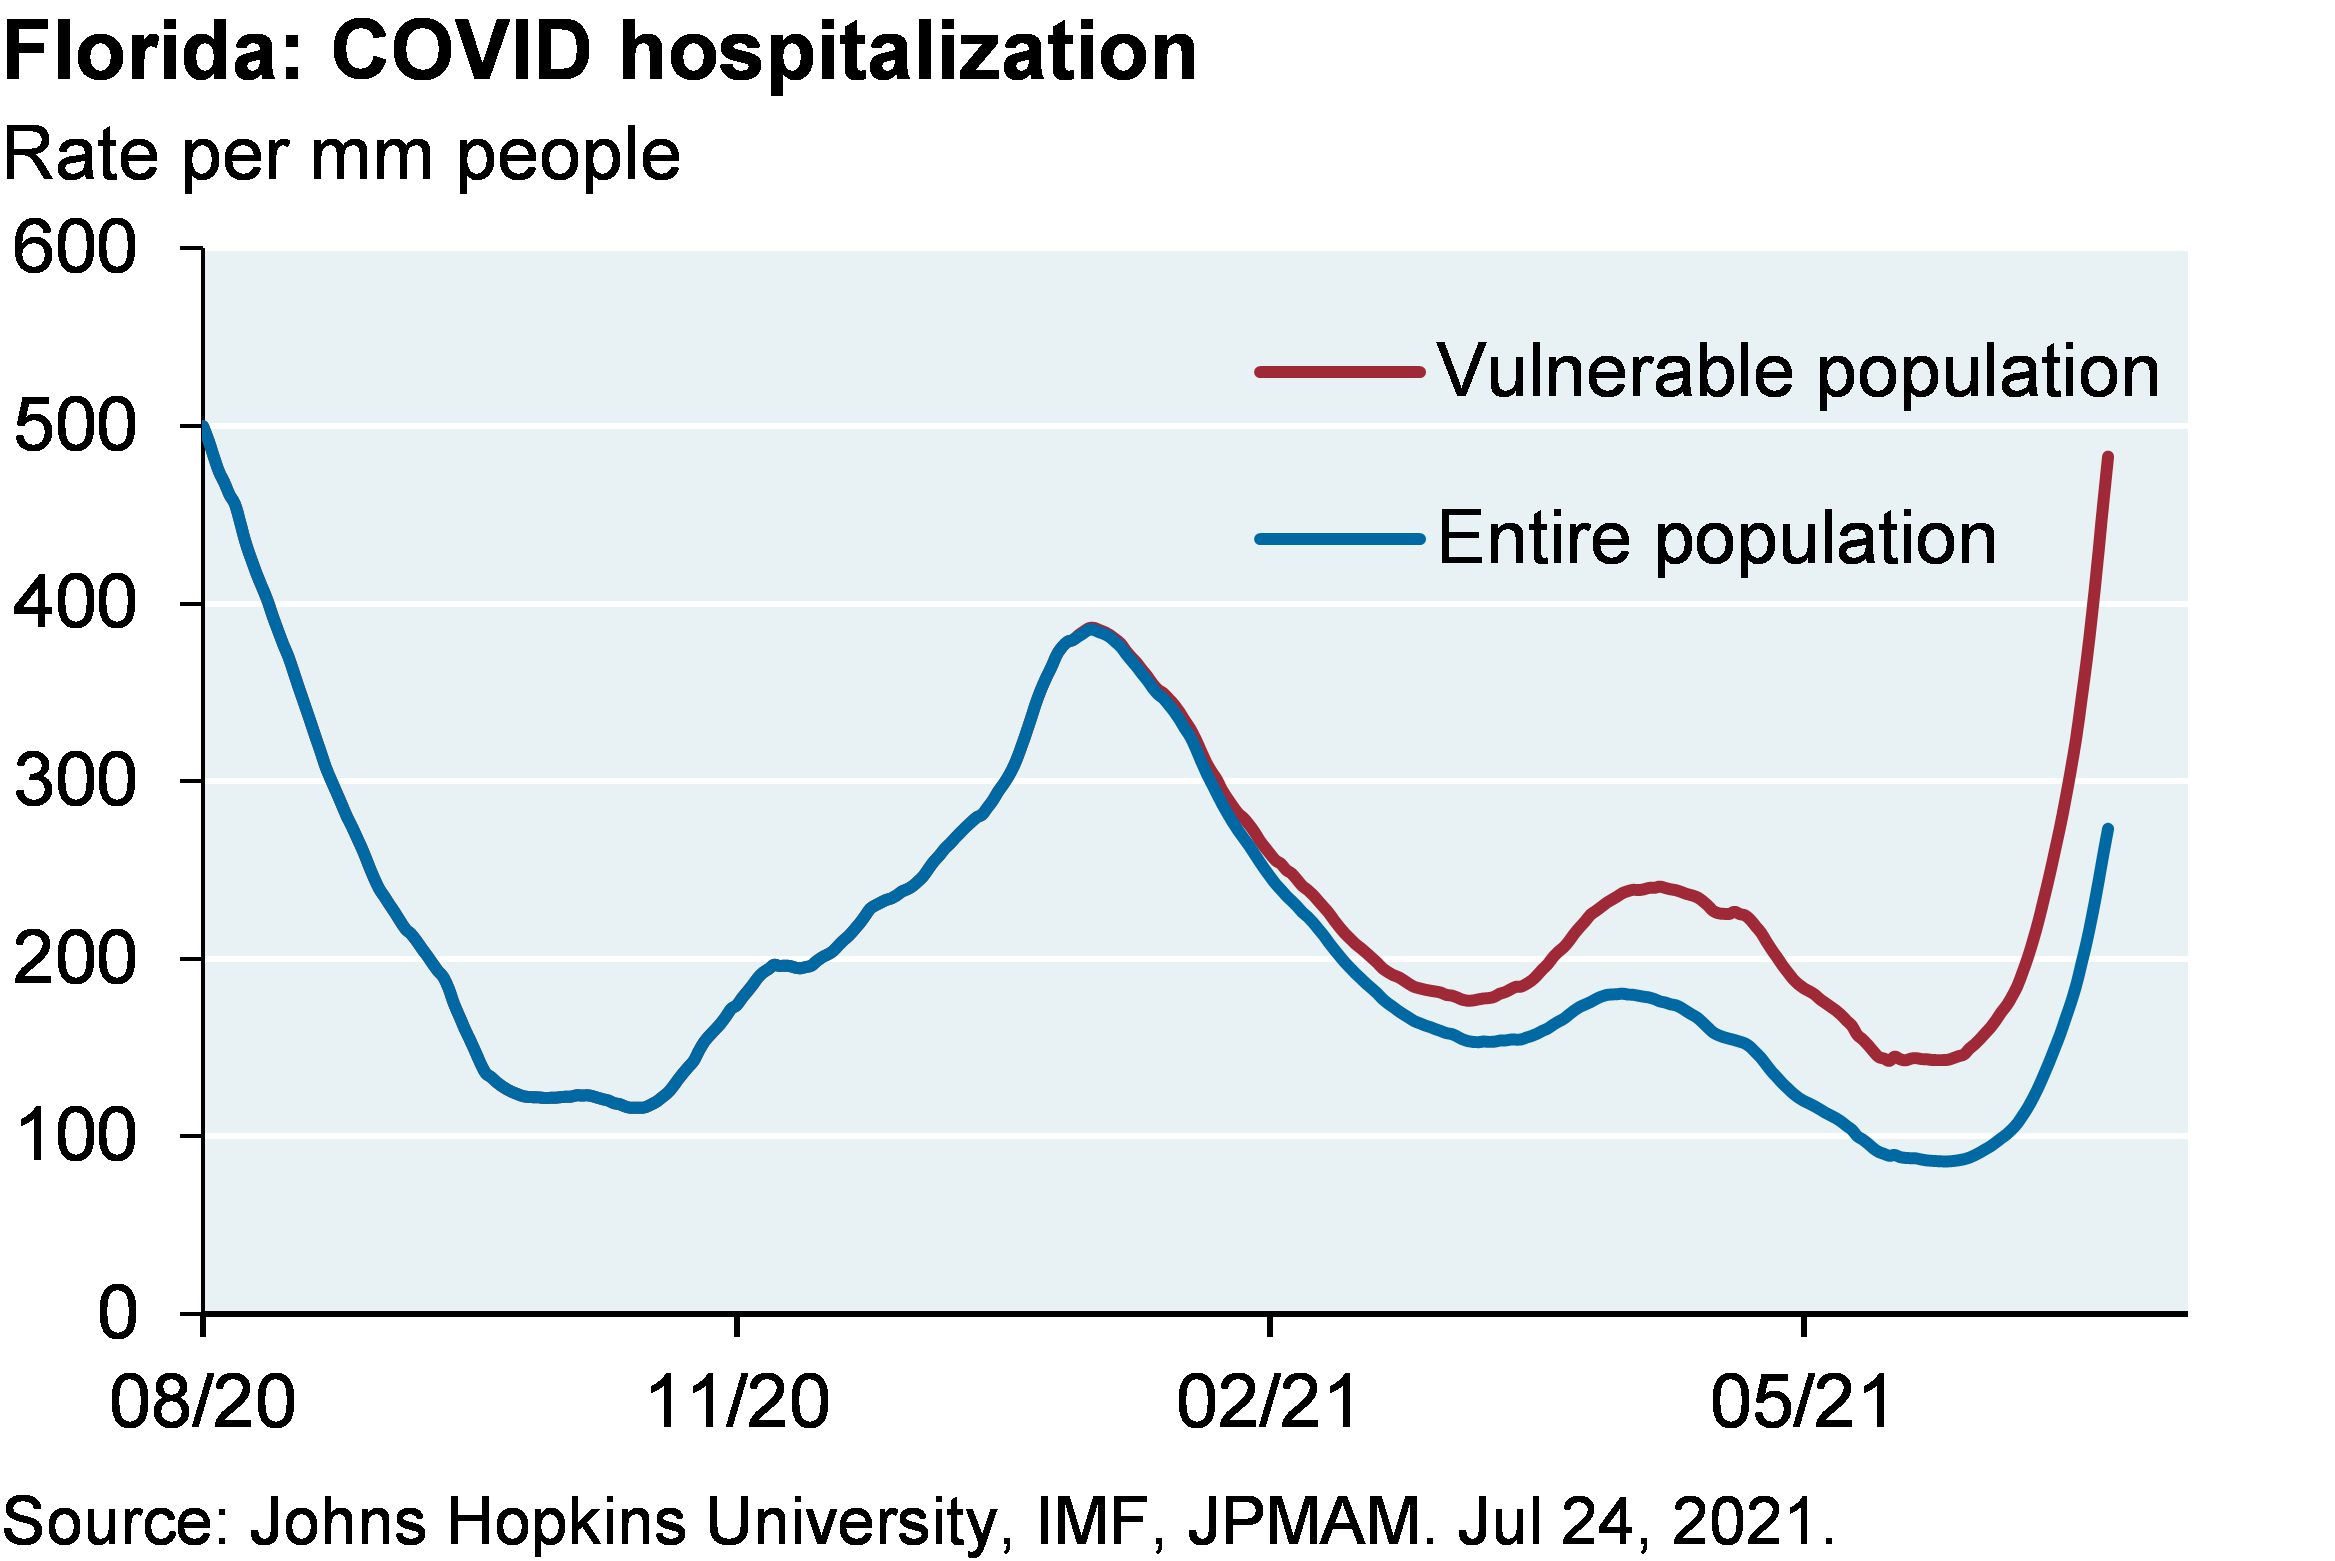 Line chart shows COVID hospitalization in Florida for the vulnerable population compared to the entire population, shown as the hospitalization rate per million people. Hospitalizations for the entire population are around 300 per million compared to almost 500 per million among the vulnerable population, which is higher than the January 2021 peak of around 400 per million.  